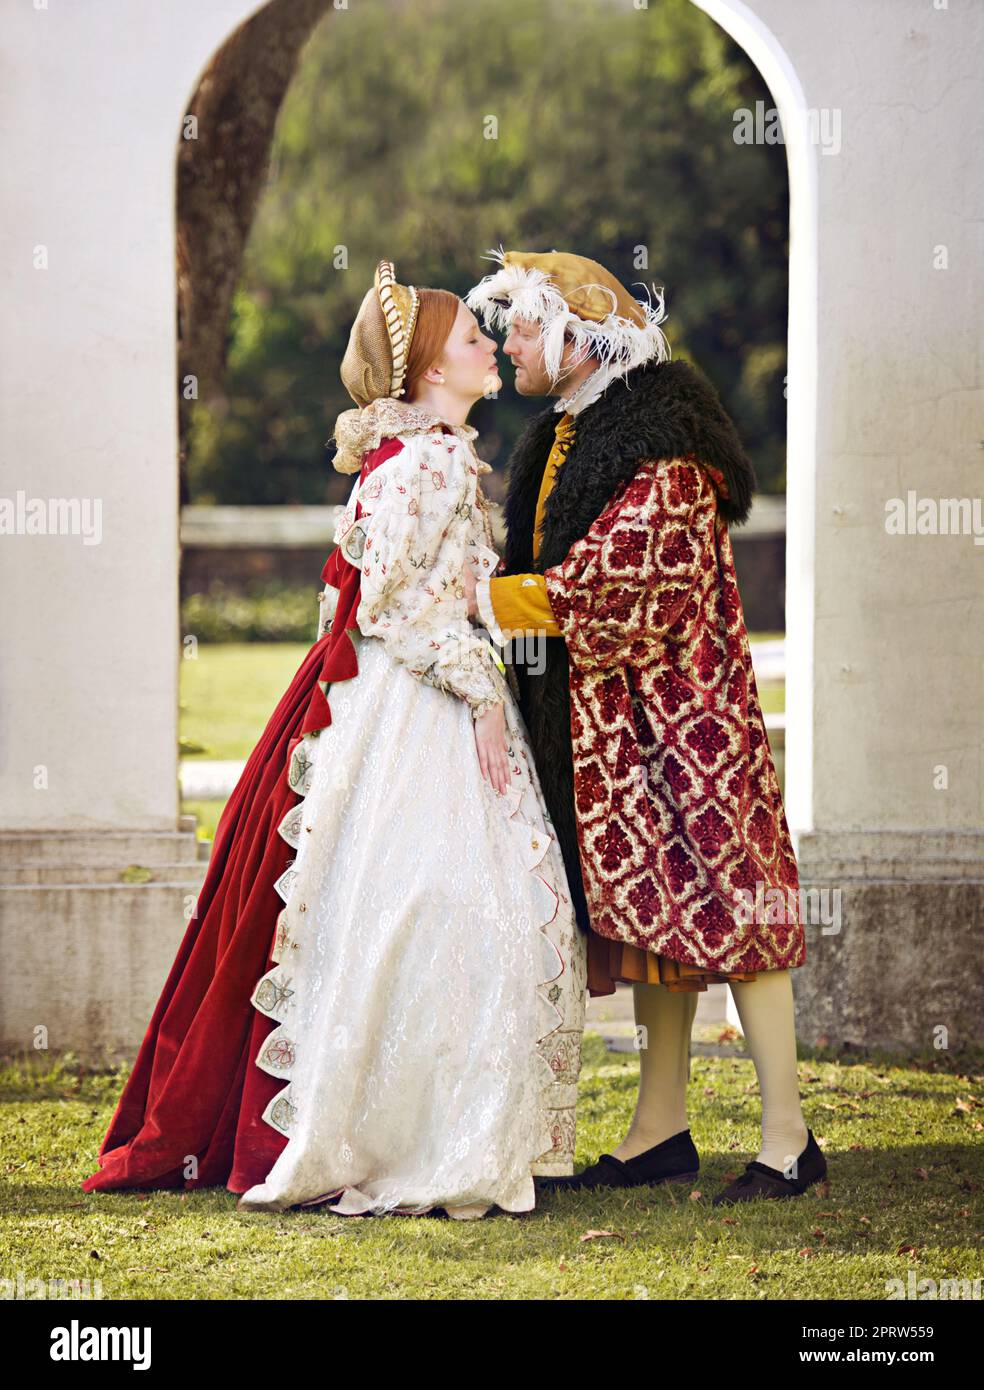 Royal romance. a royal couple spending time together at the gardens. Stock Photo